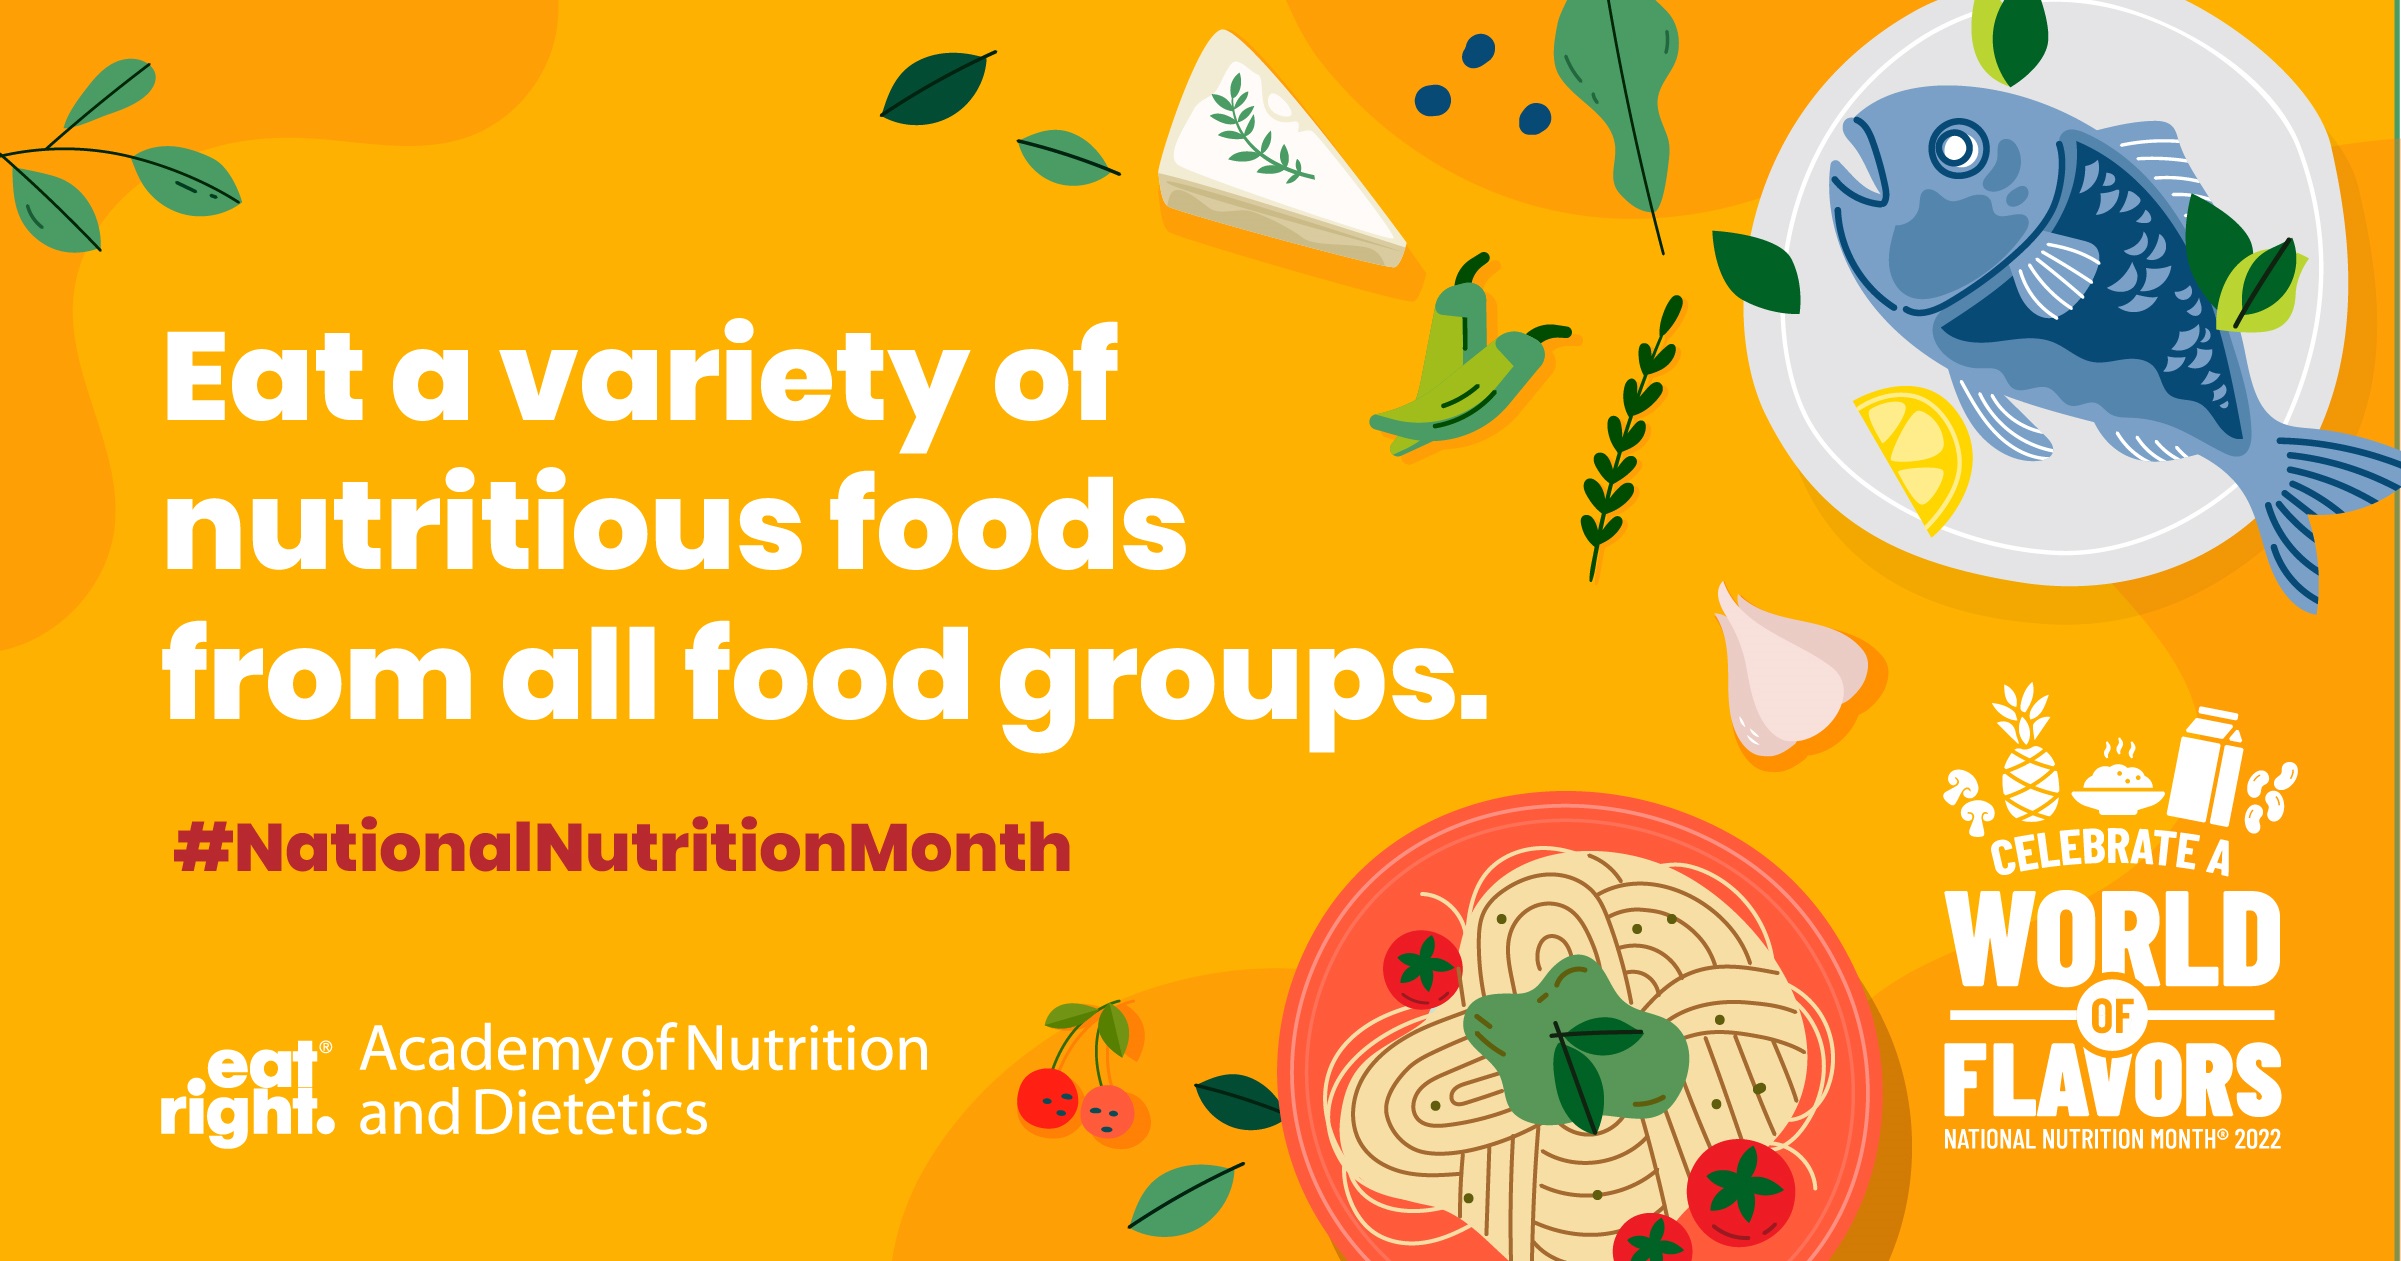 National Nutrition Month Graphic: Eat a variety of nutritious foods from all food groups